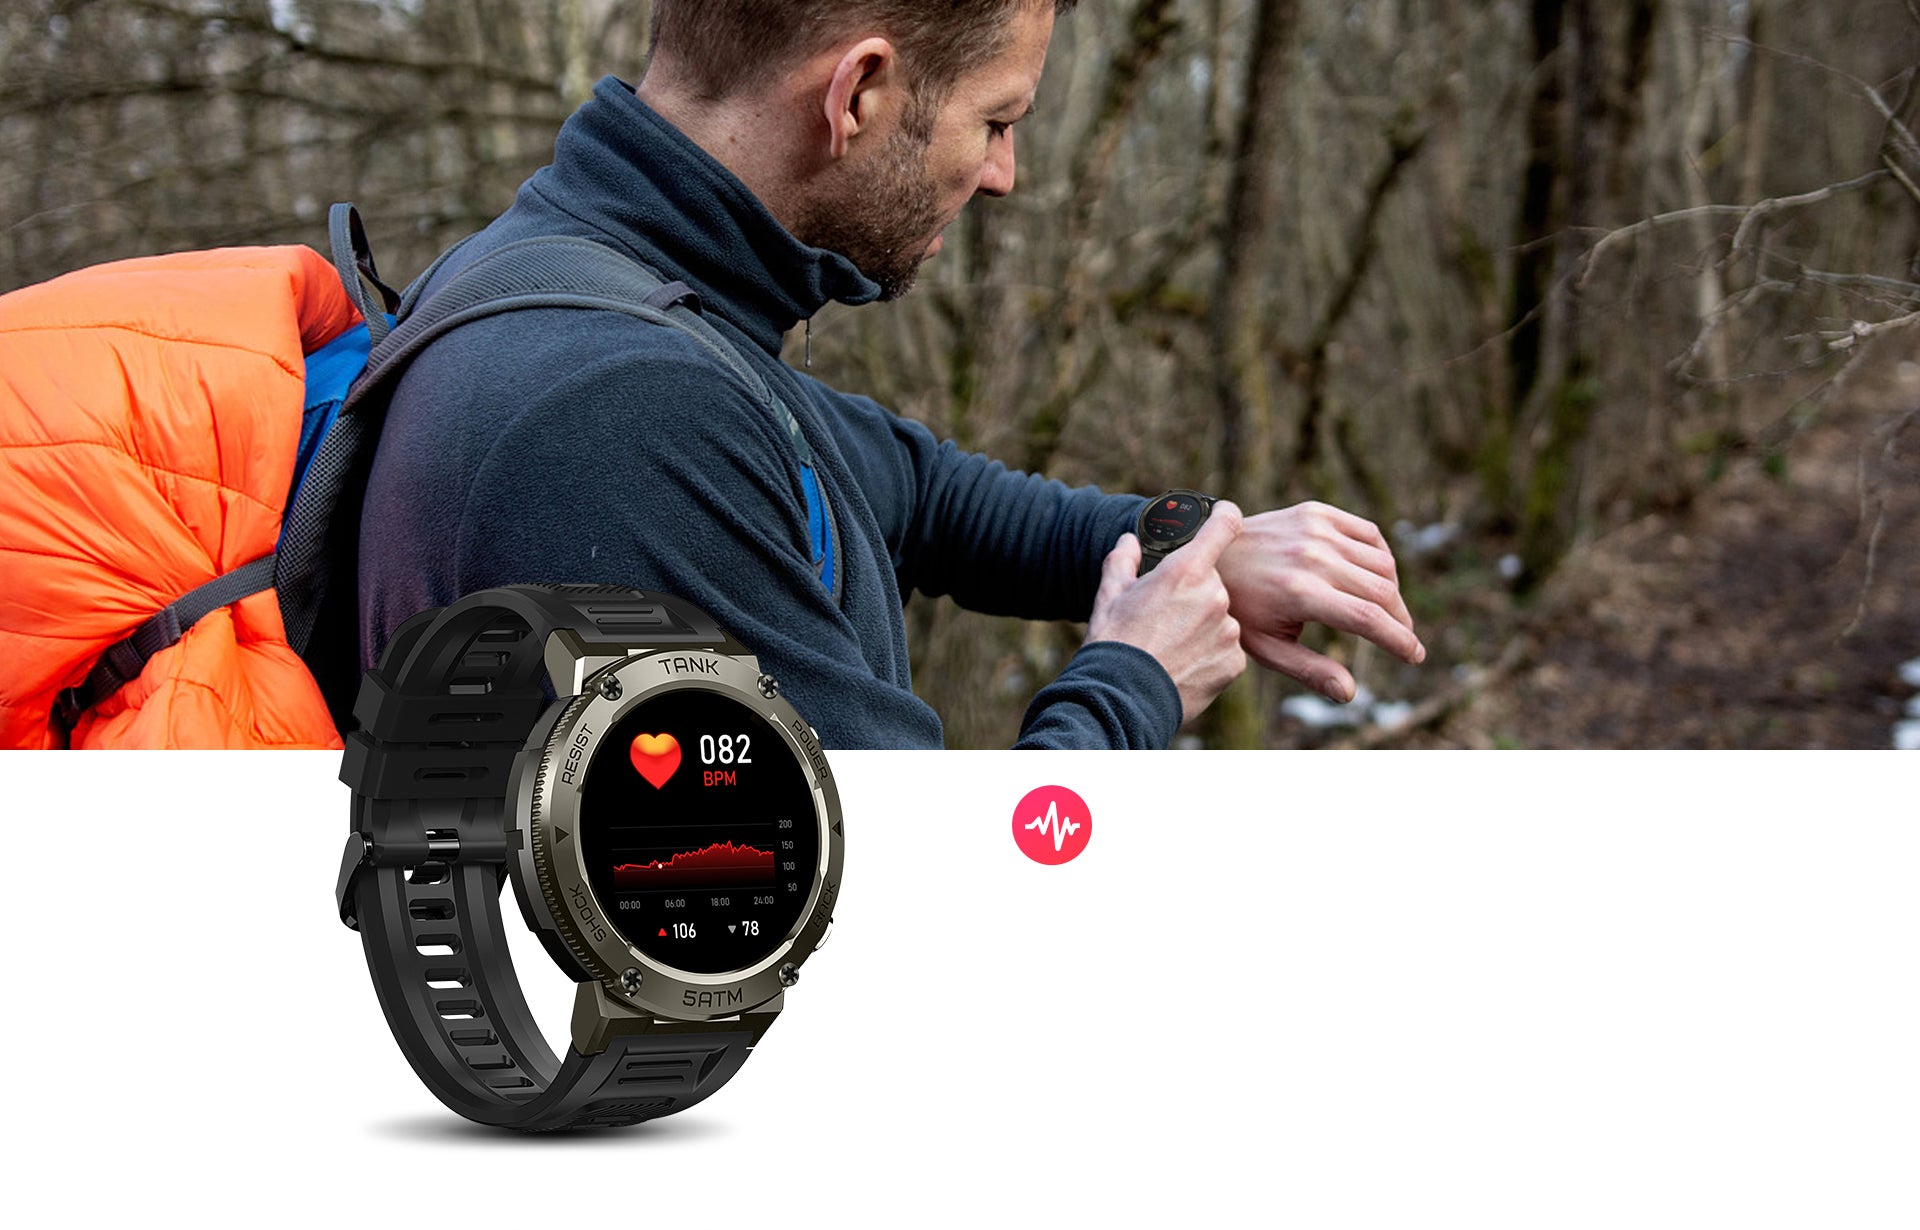 KOSPET TANK T1 Smartwatch Support All-day Heart Rate Monitoring